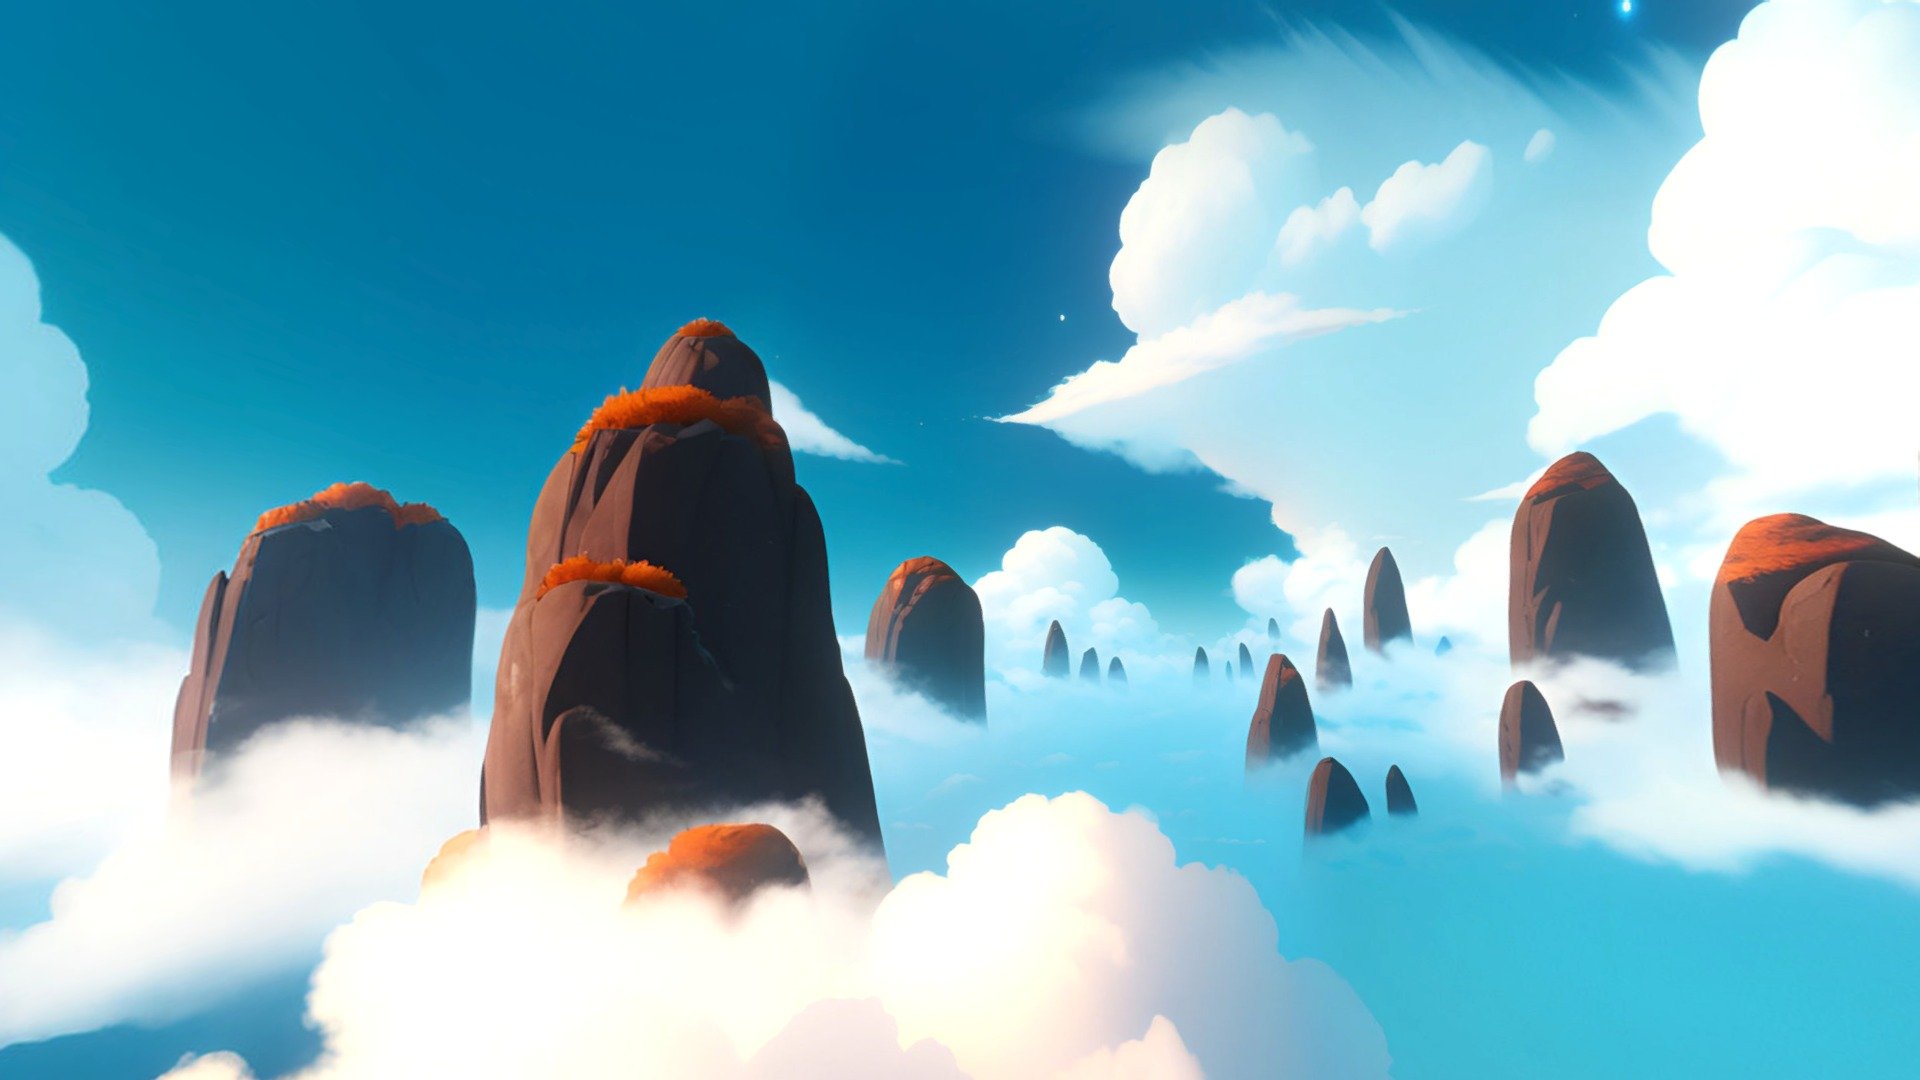 Beautiful stylized dreamy skybox. Perfect for beautiful, stylized environments and your rendering scene.

The package contains one panorama texture and one cubemap texture (png)

panorama texture: 8192 x 4096 

cubemap texture: 6144 x 4608 

Because of this size it is easier to customize more and better details if you want that. 

The sizes can be changed in your graphics program as desired

( textures are under Other available downloads)

used: AI, Photoshop

*-------------Terms of Use--------------

Commercial use of the assets provided is permitted but cannot be included in an asset pack or sold at any sort of asset/resource marketplace or be shared for free* - Stylized Cloudy Sky 015 - Buy Royalty Free 3D model by stylized skybox (@skybox_) 3d model